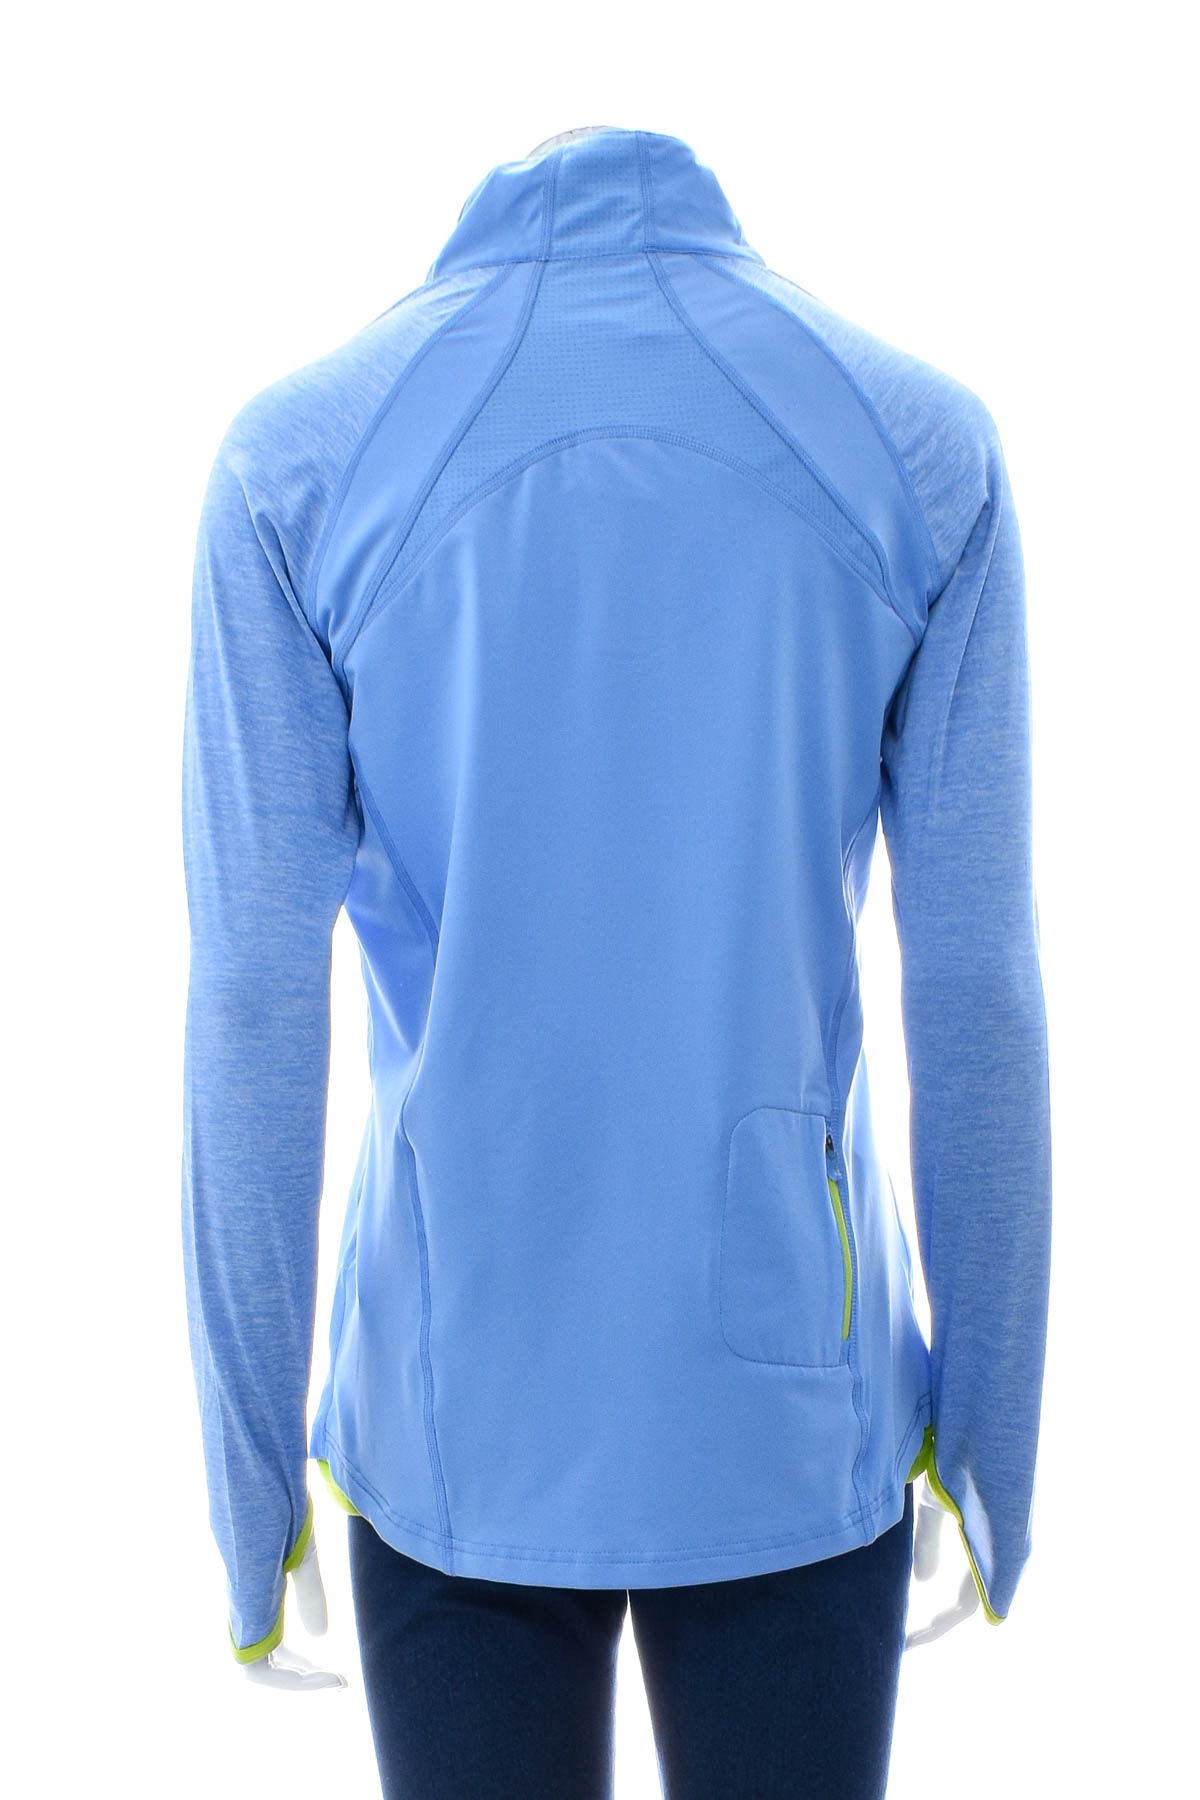 Women's sport blouse - Active LIMITED by Tchibo - 1